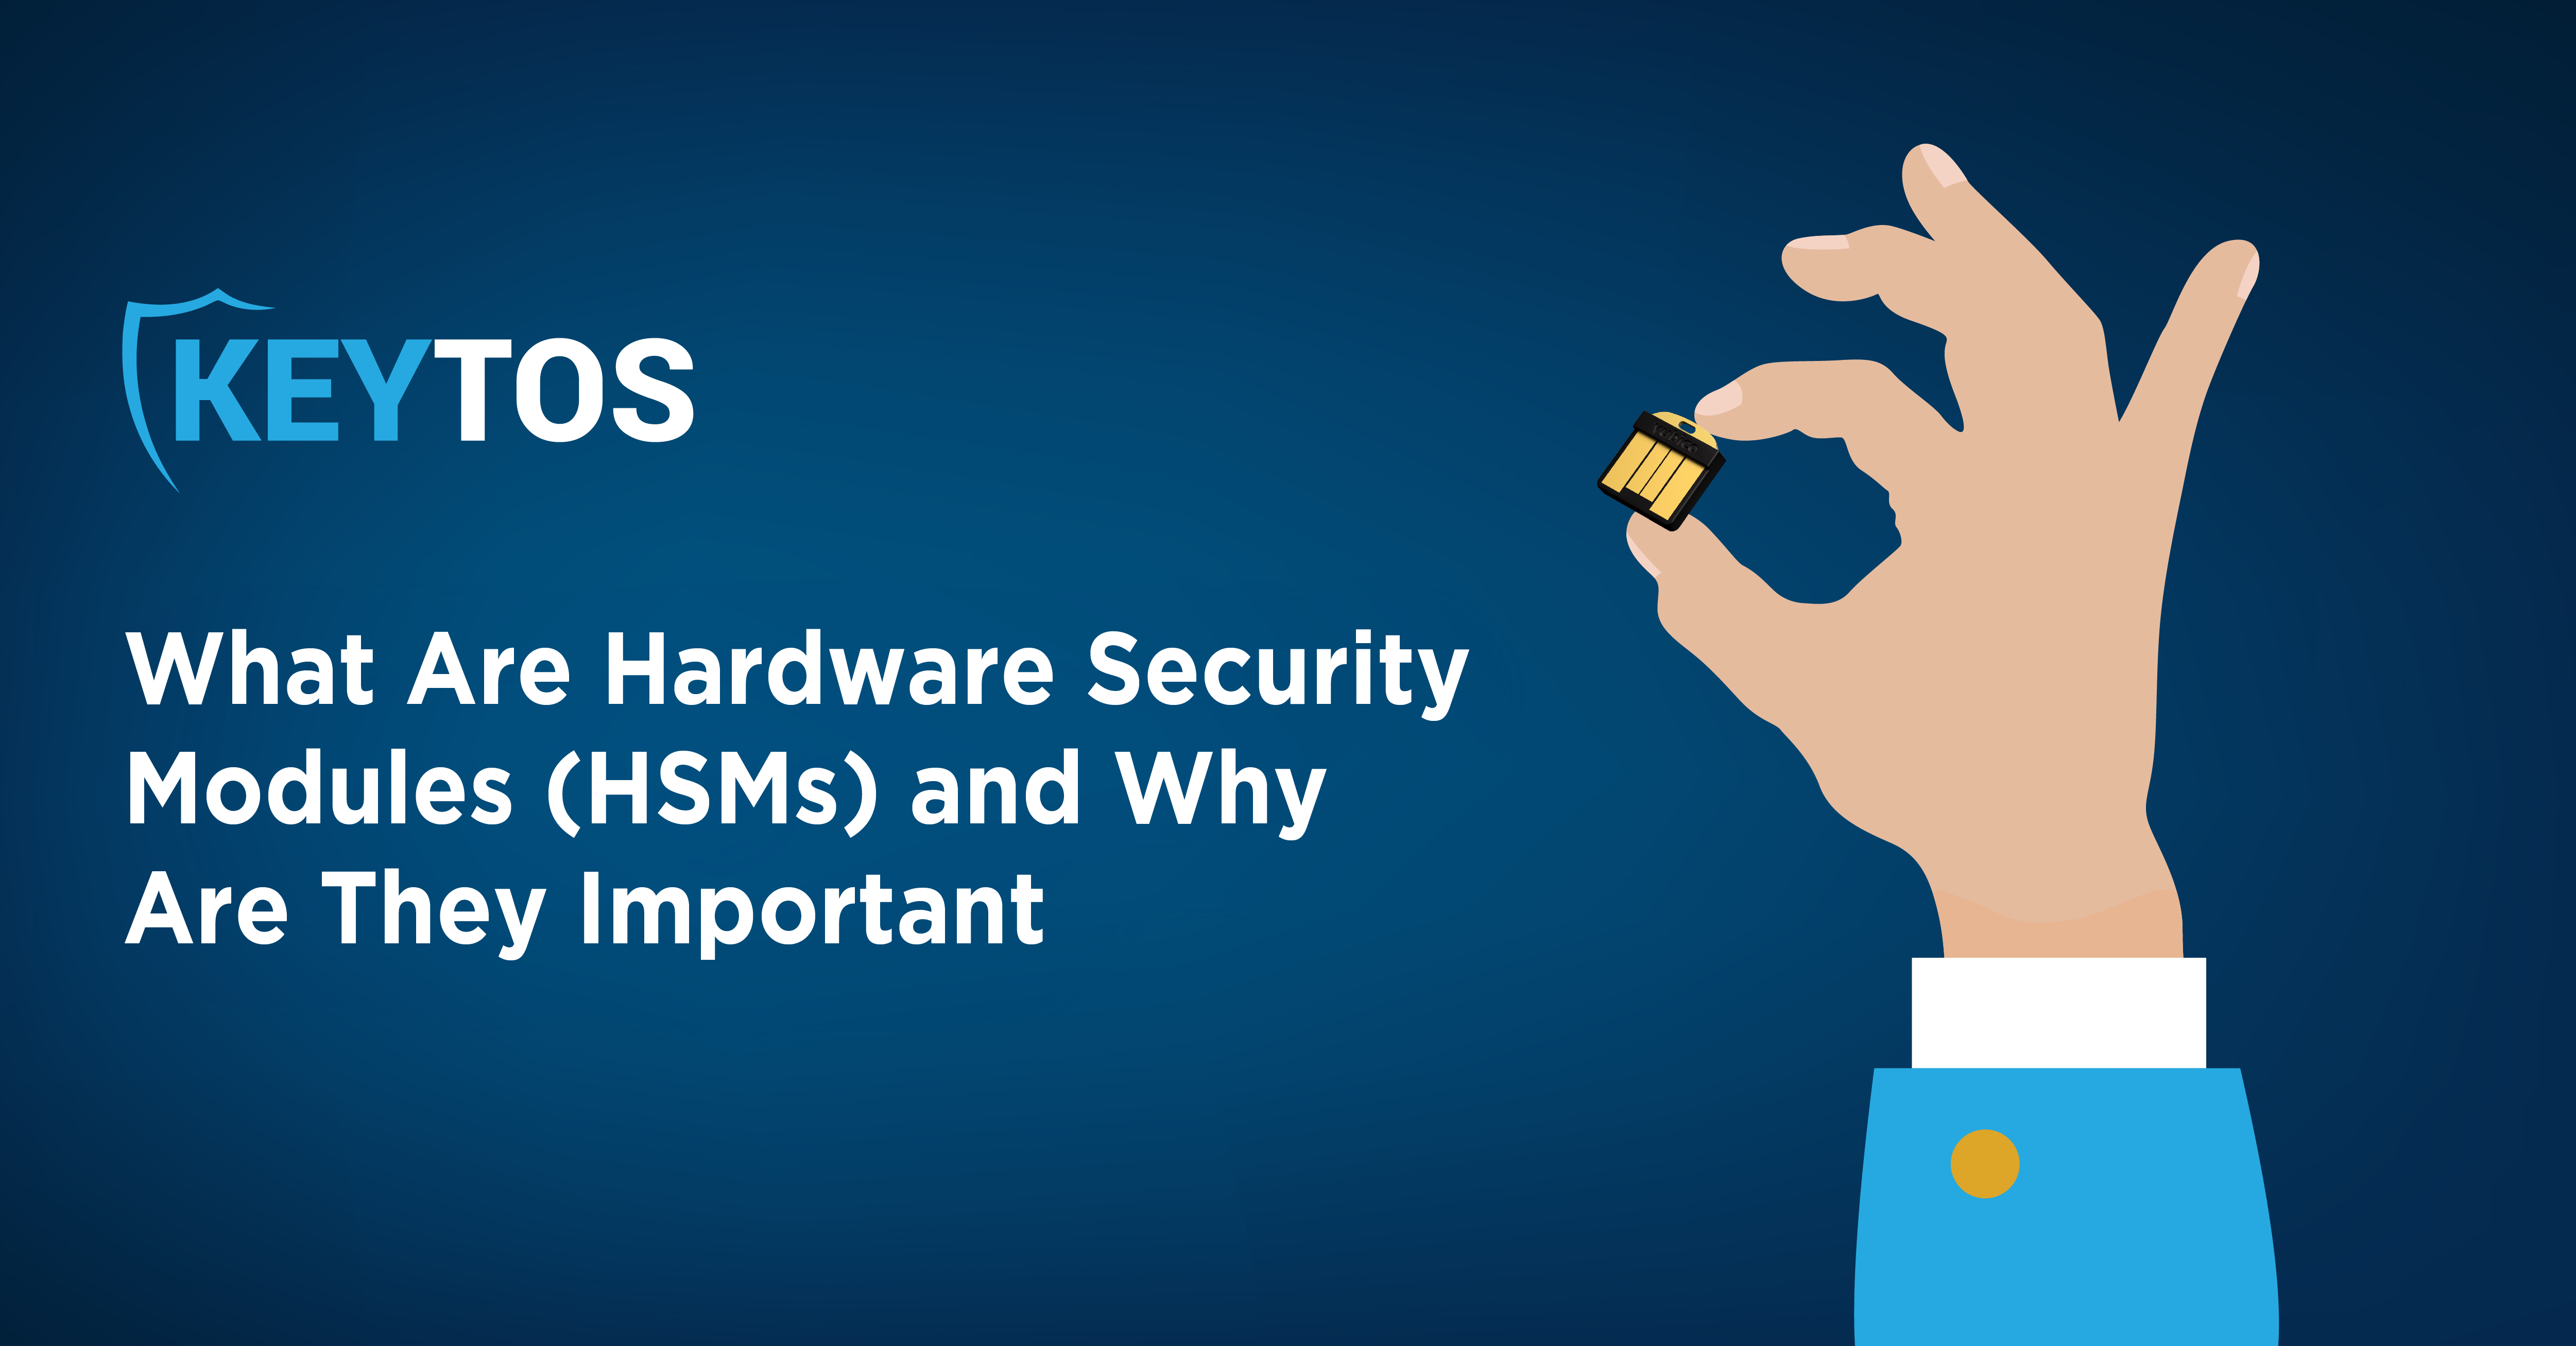 What Are Hardware Security Modules (HSMs) and Why Are They Important?